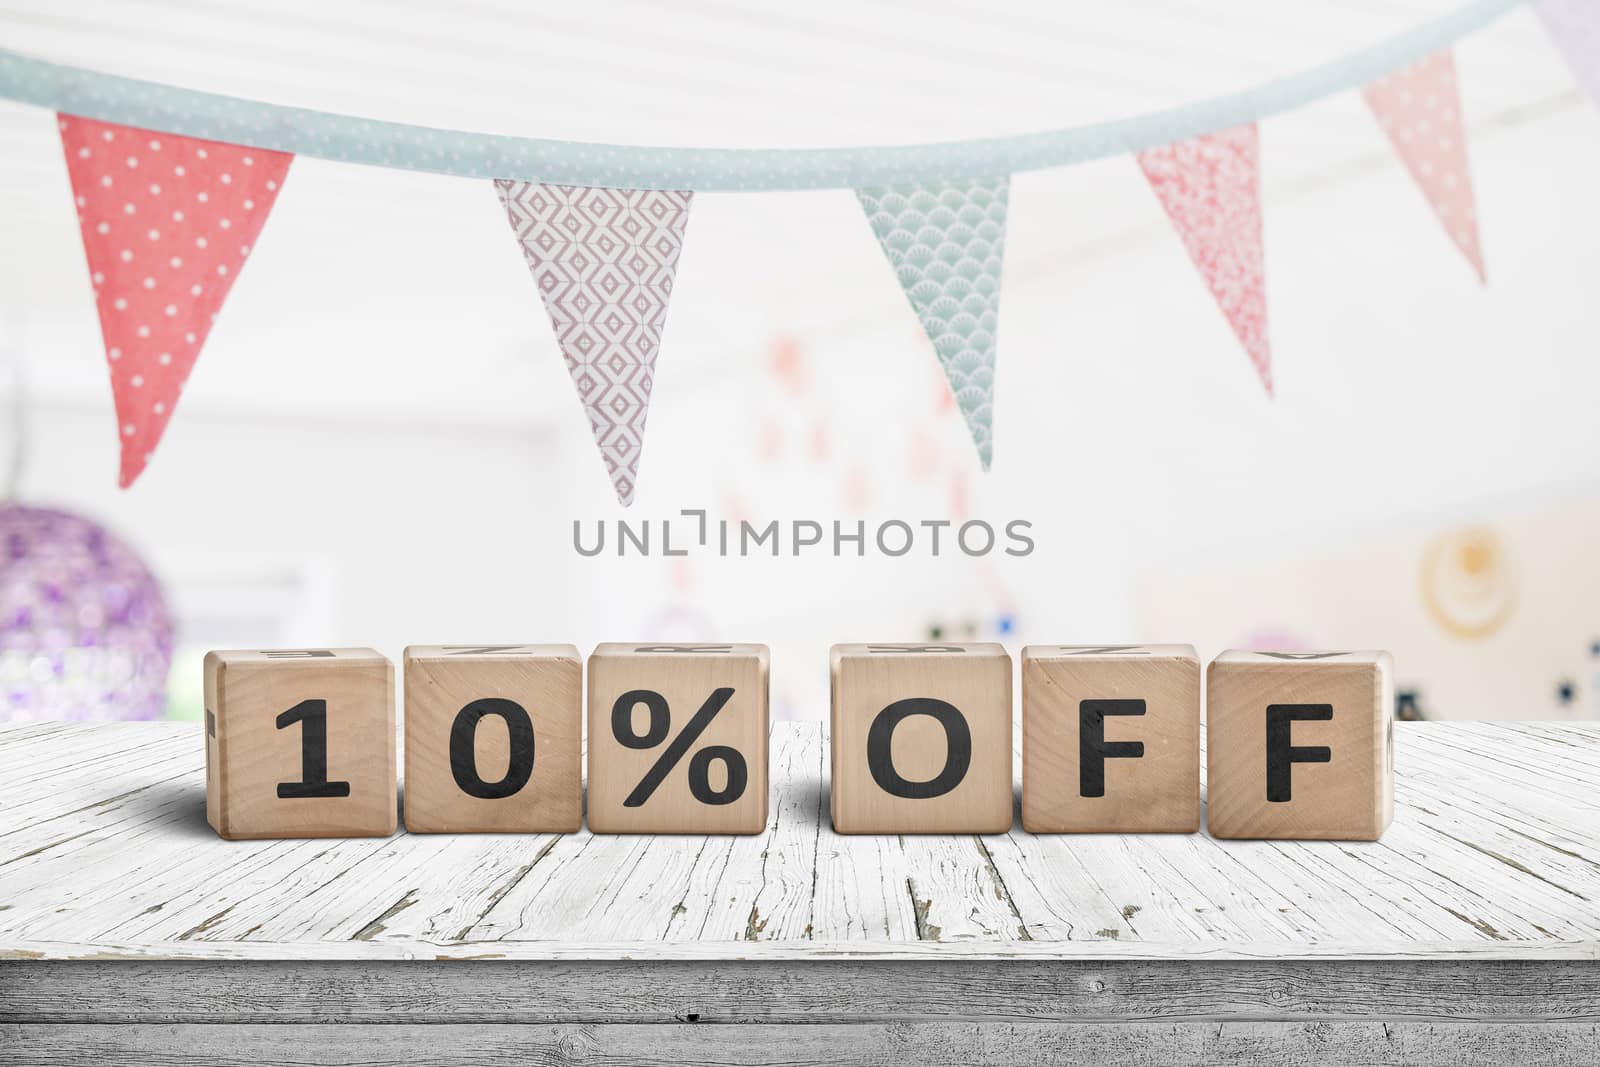 Special price 10 percent off promotion sign on a desk with colorful flags above